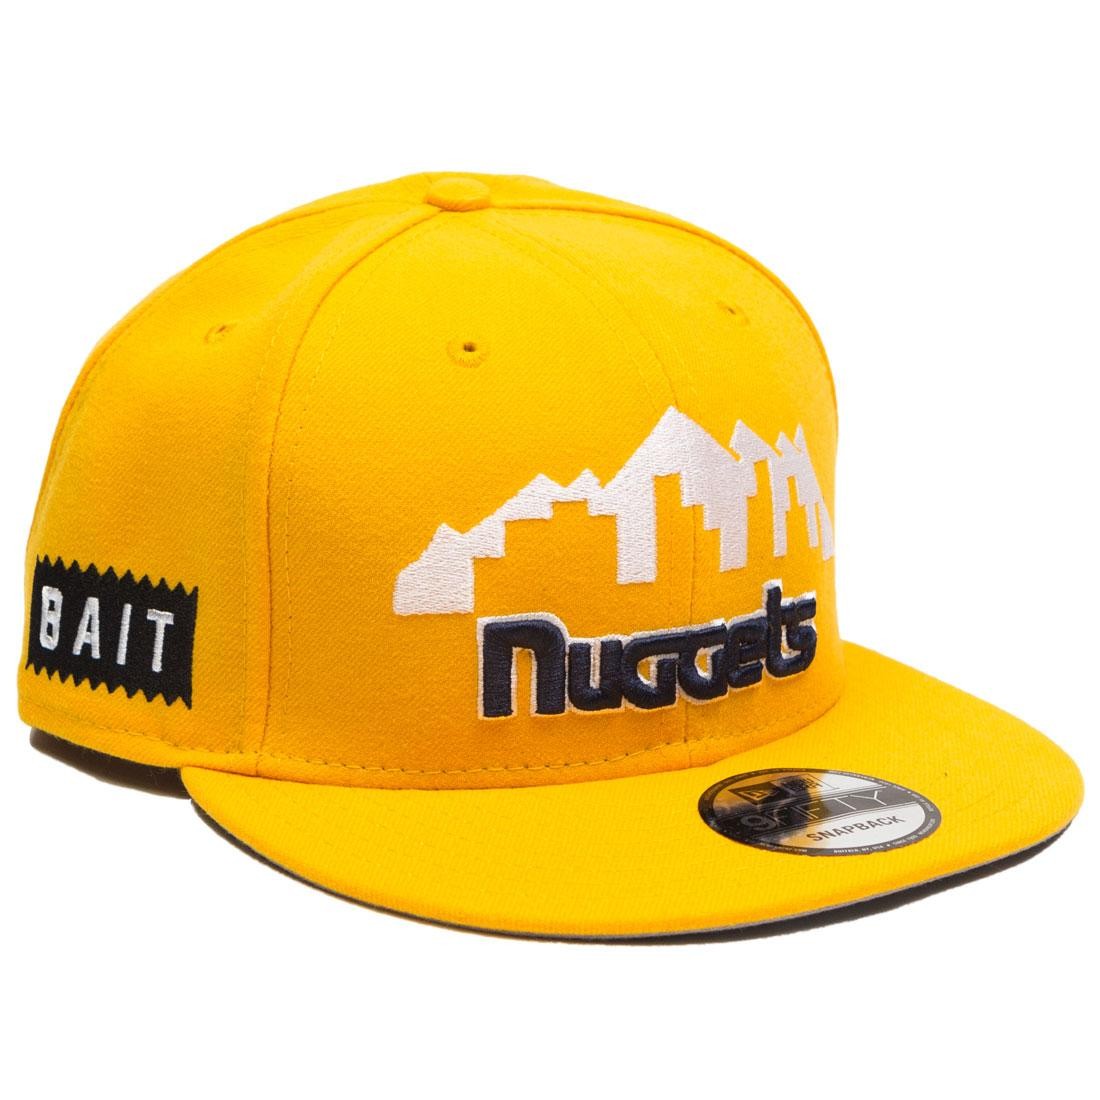 Buy NBA DENVER NUGGETS 2023 NBA CHAMPIONS 9FIFTY CAP for EUR 38.90